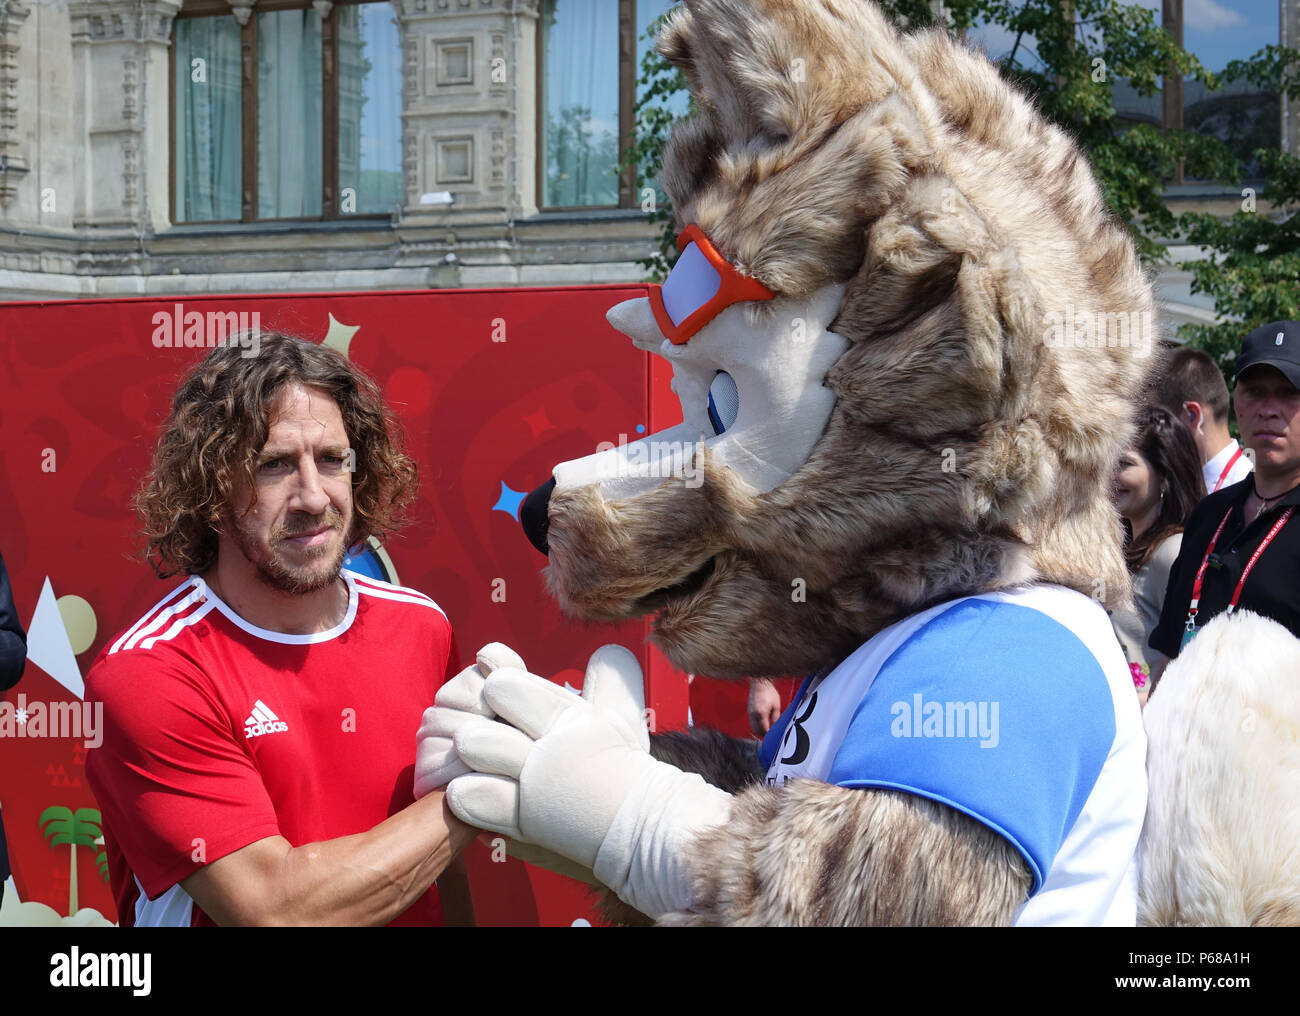 Moscow, Russia. 28th June, 2018. Former Spain player Carles Puyol at the football park at Red Square with World Cup mascot Zabivaka. Credit: Friedemann Kohler/dpa/Alamy Live News Stock Photo